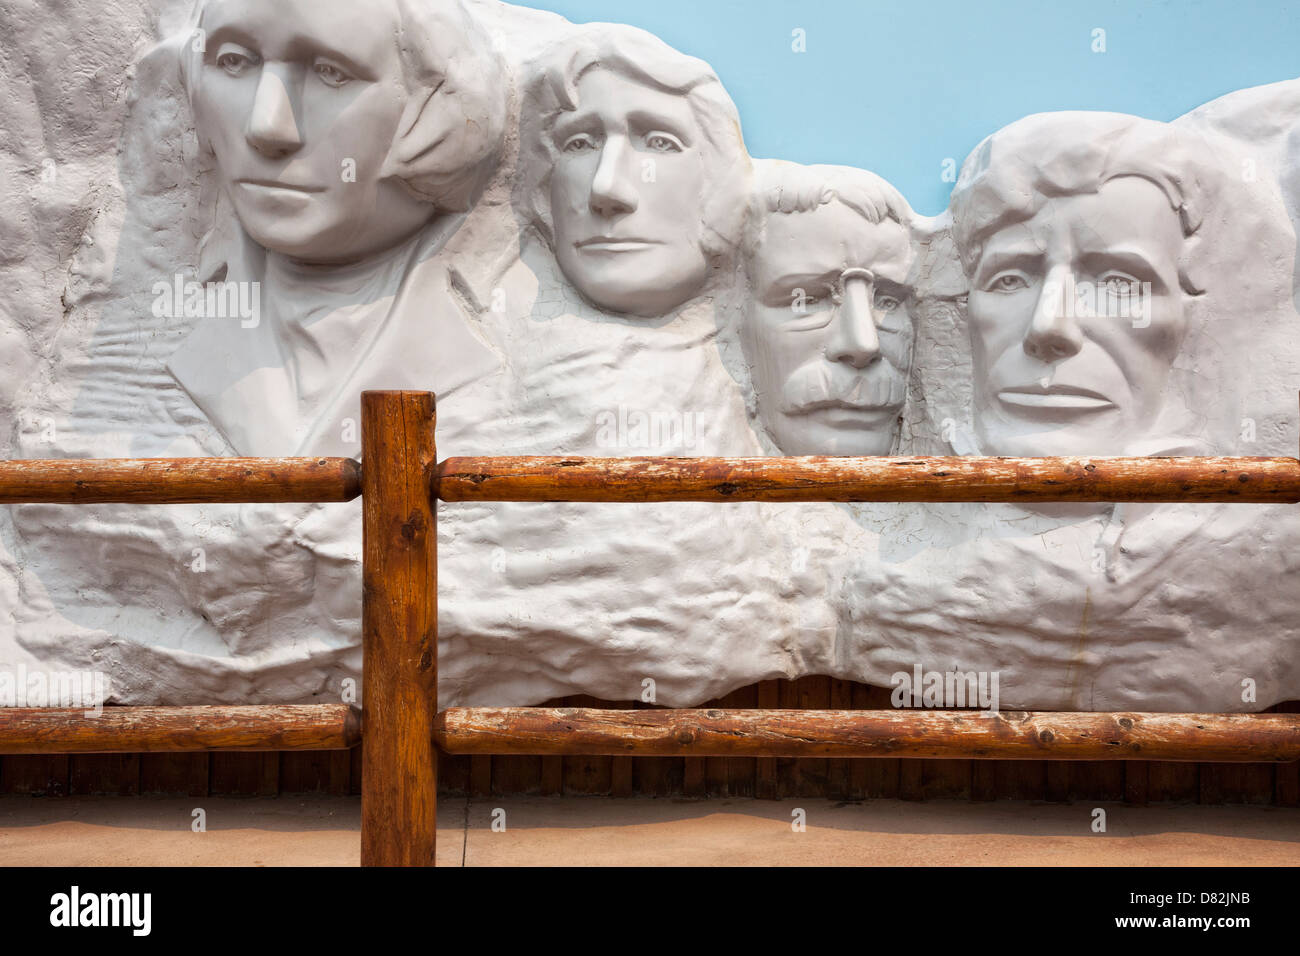 Mount Rushmore model at Wall Drug store in Wall, South Dakota Stock Photo